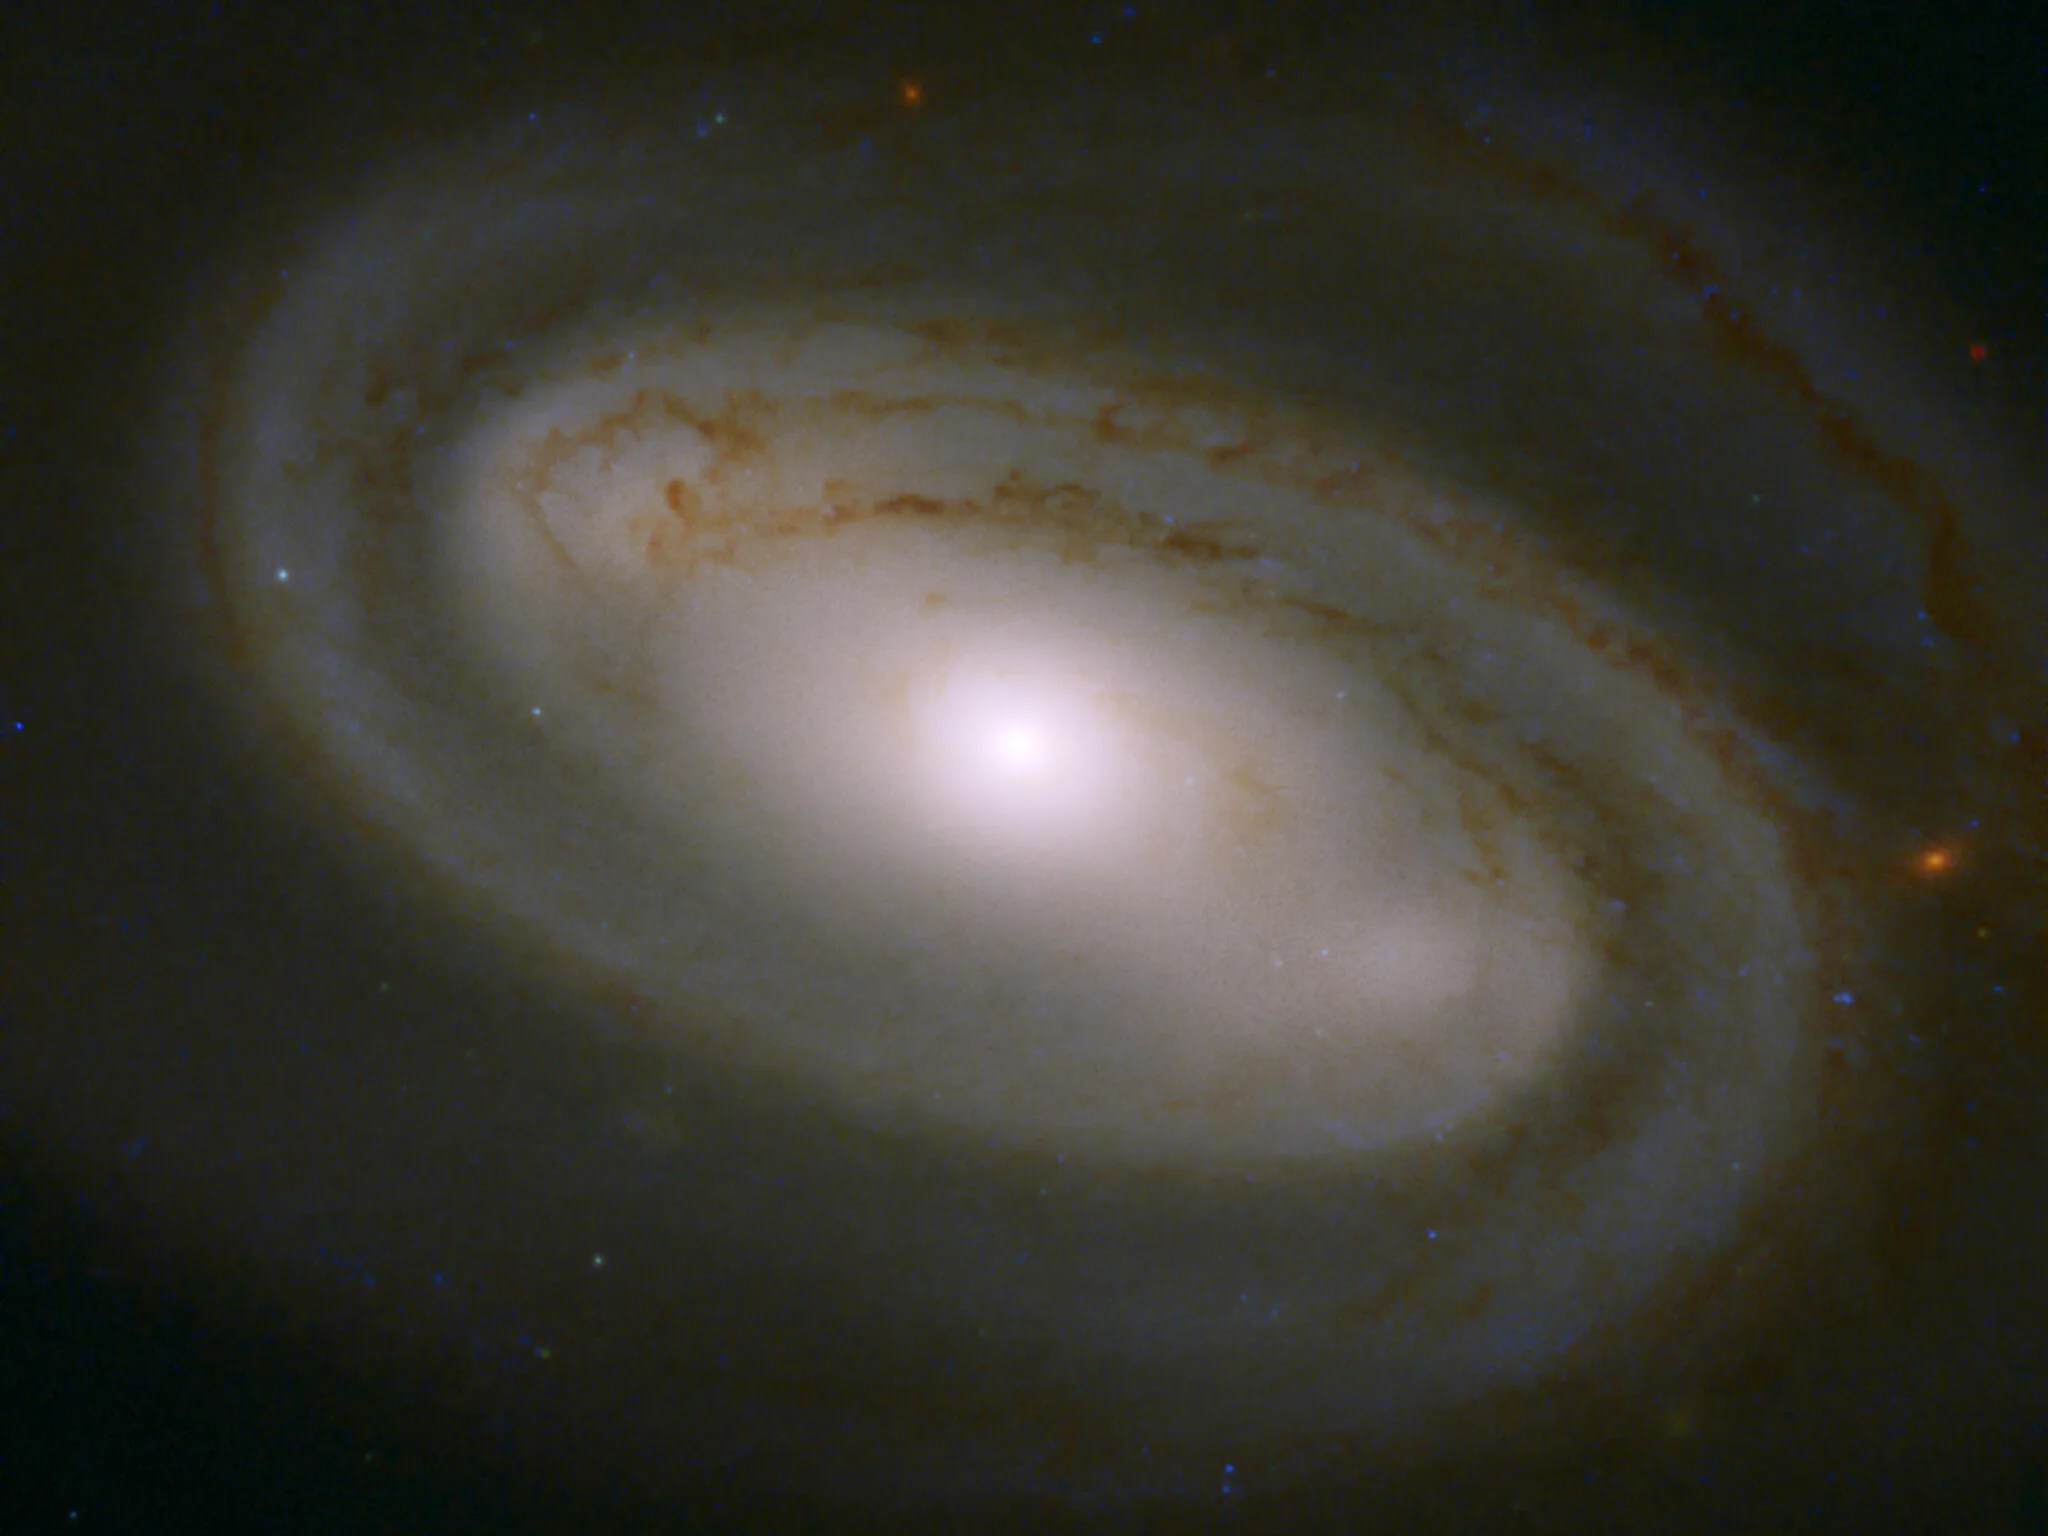 Light, glowing spiral galaxy ngc 3895 as seen by hubble